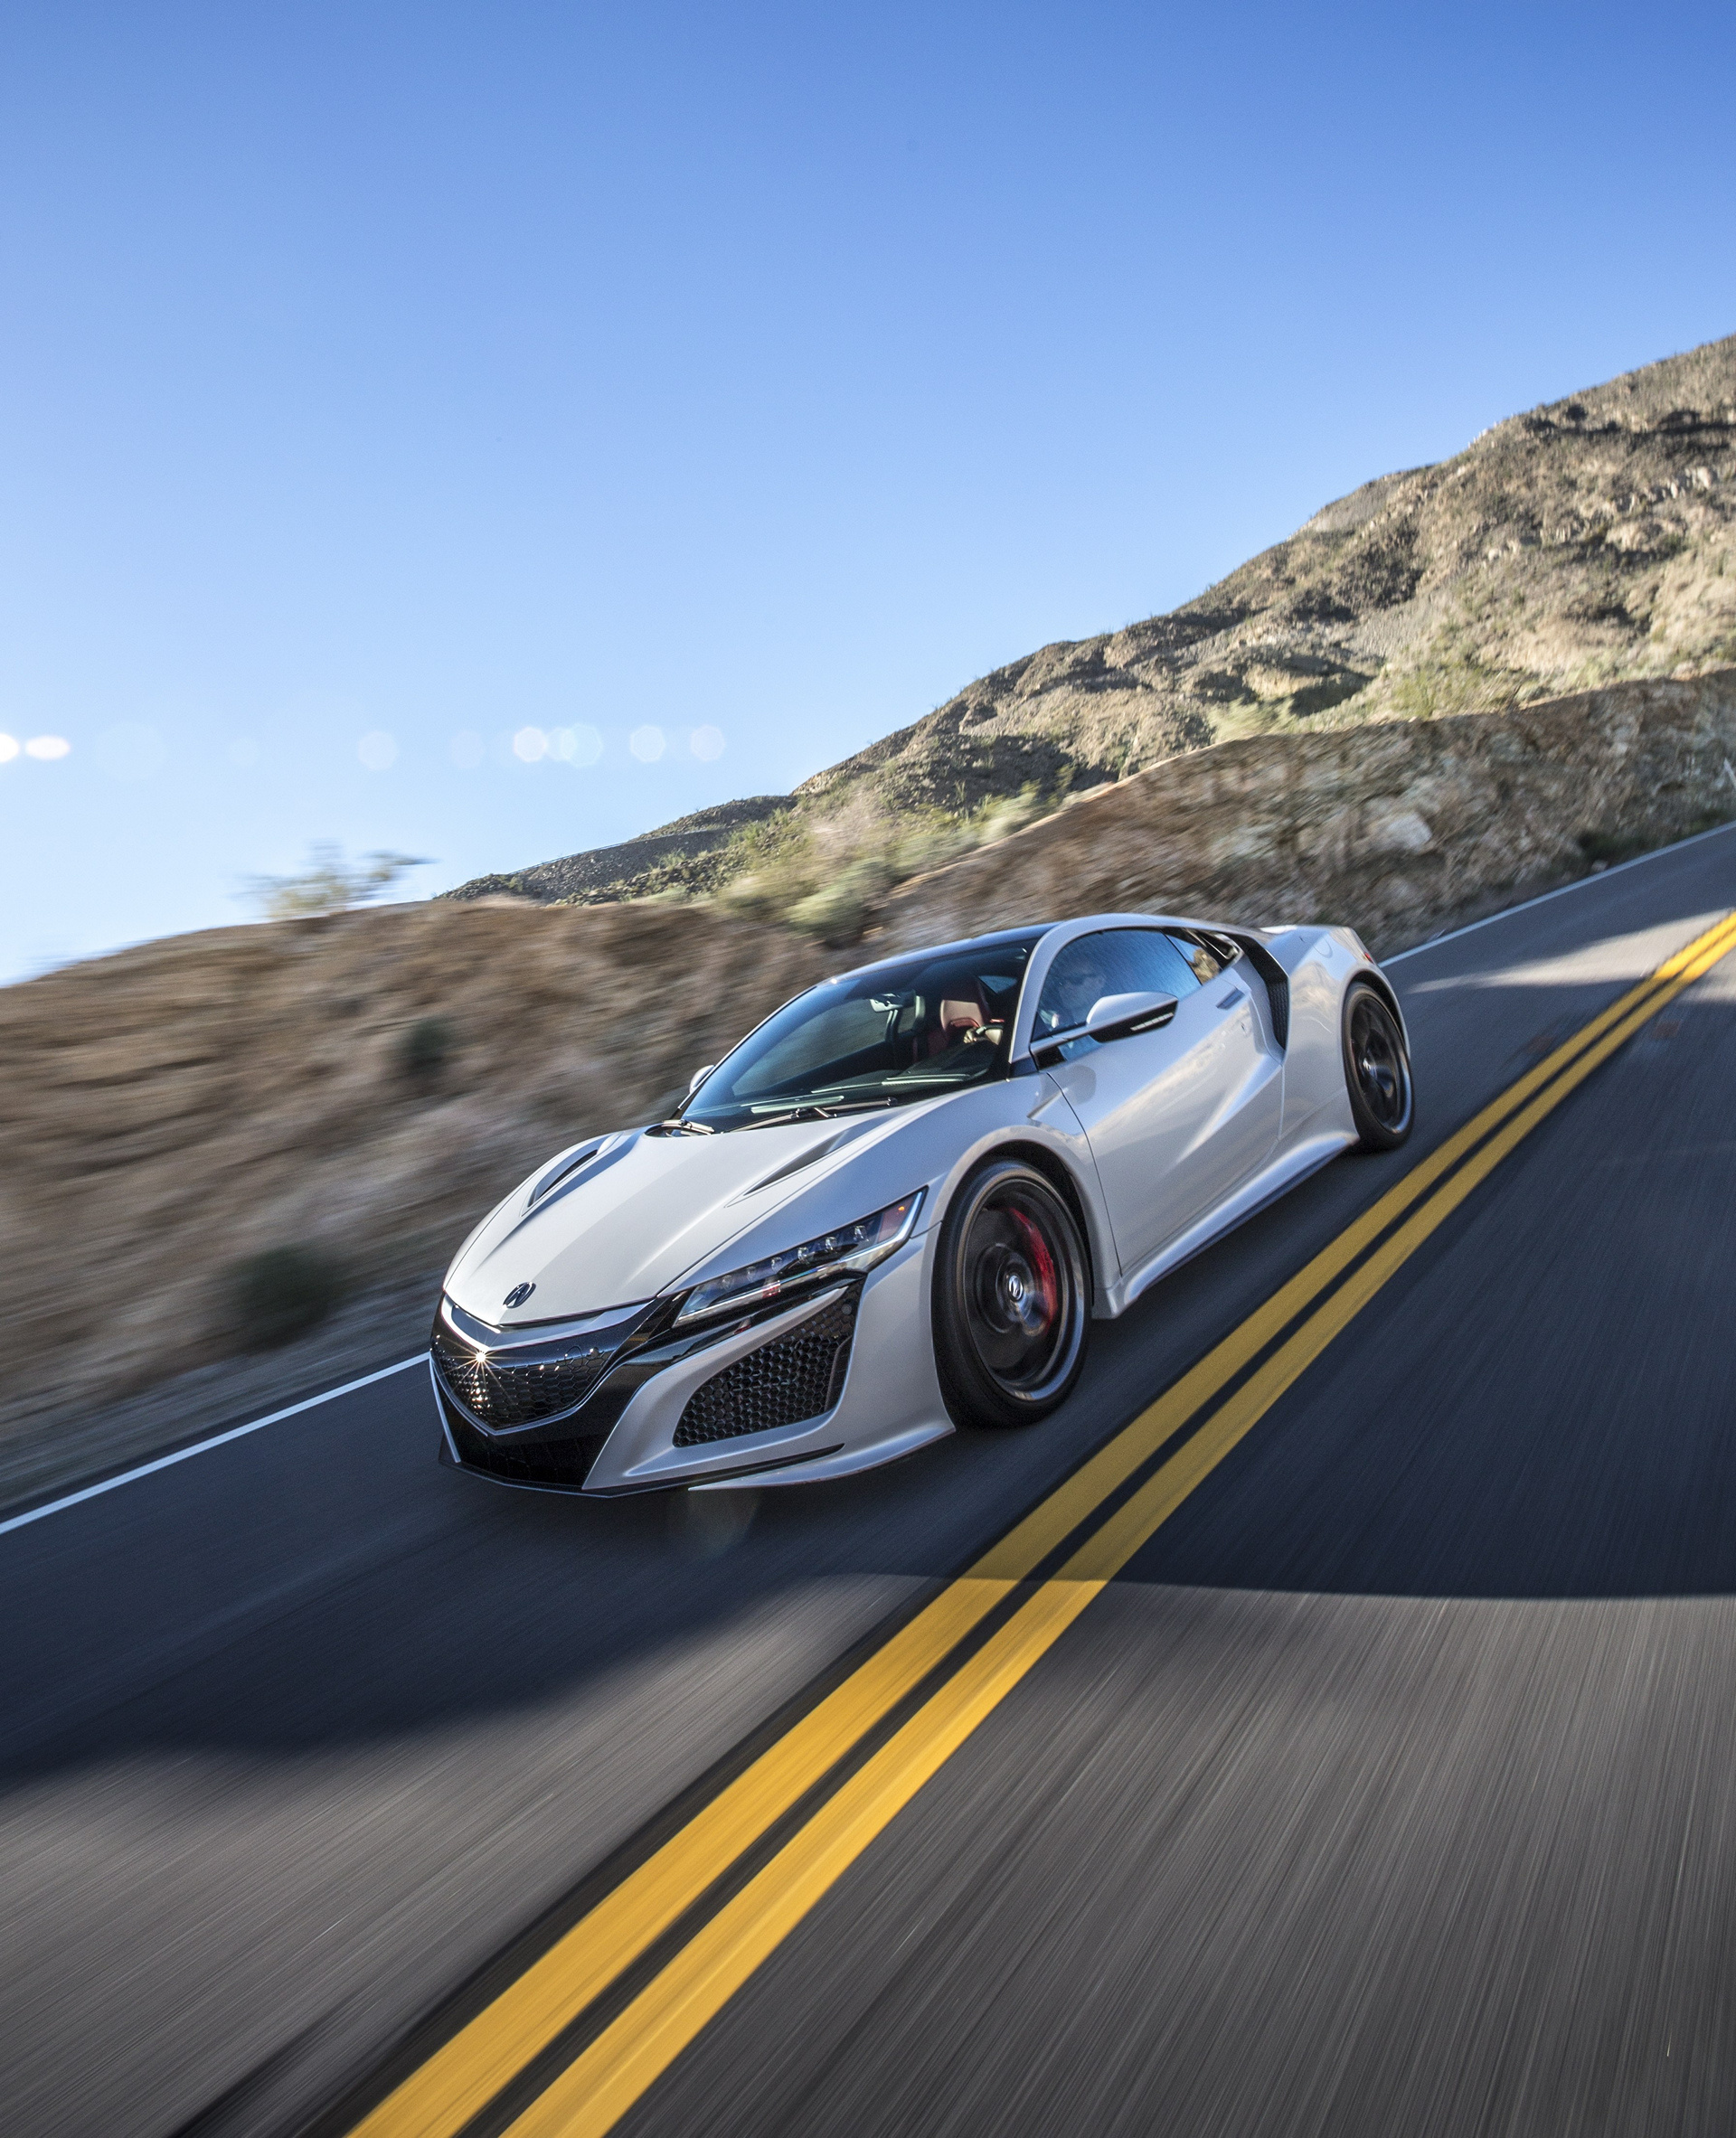 Sports Car: Acura NSX, Adjustable components optimize performance at different speeds. 1920x2370 HD Wallpaper.